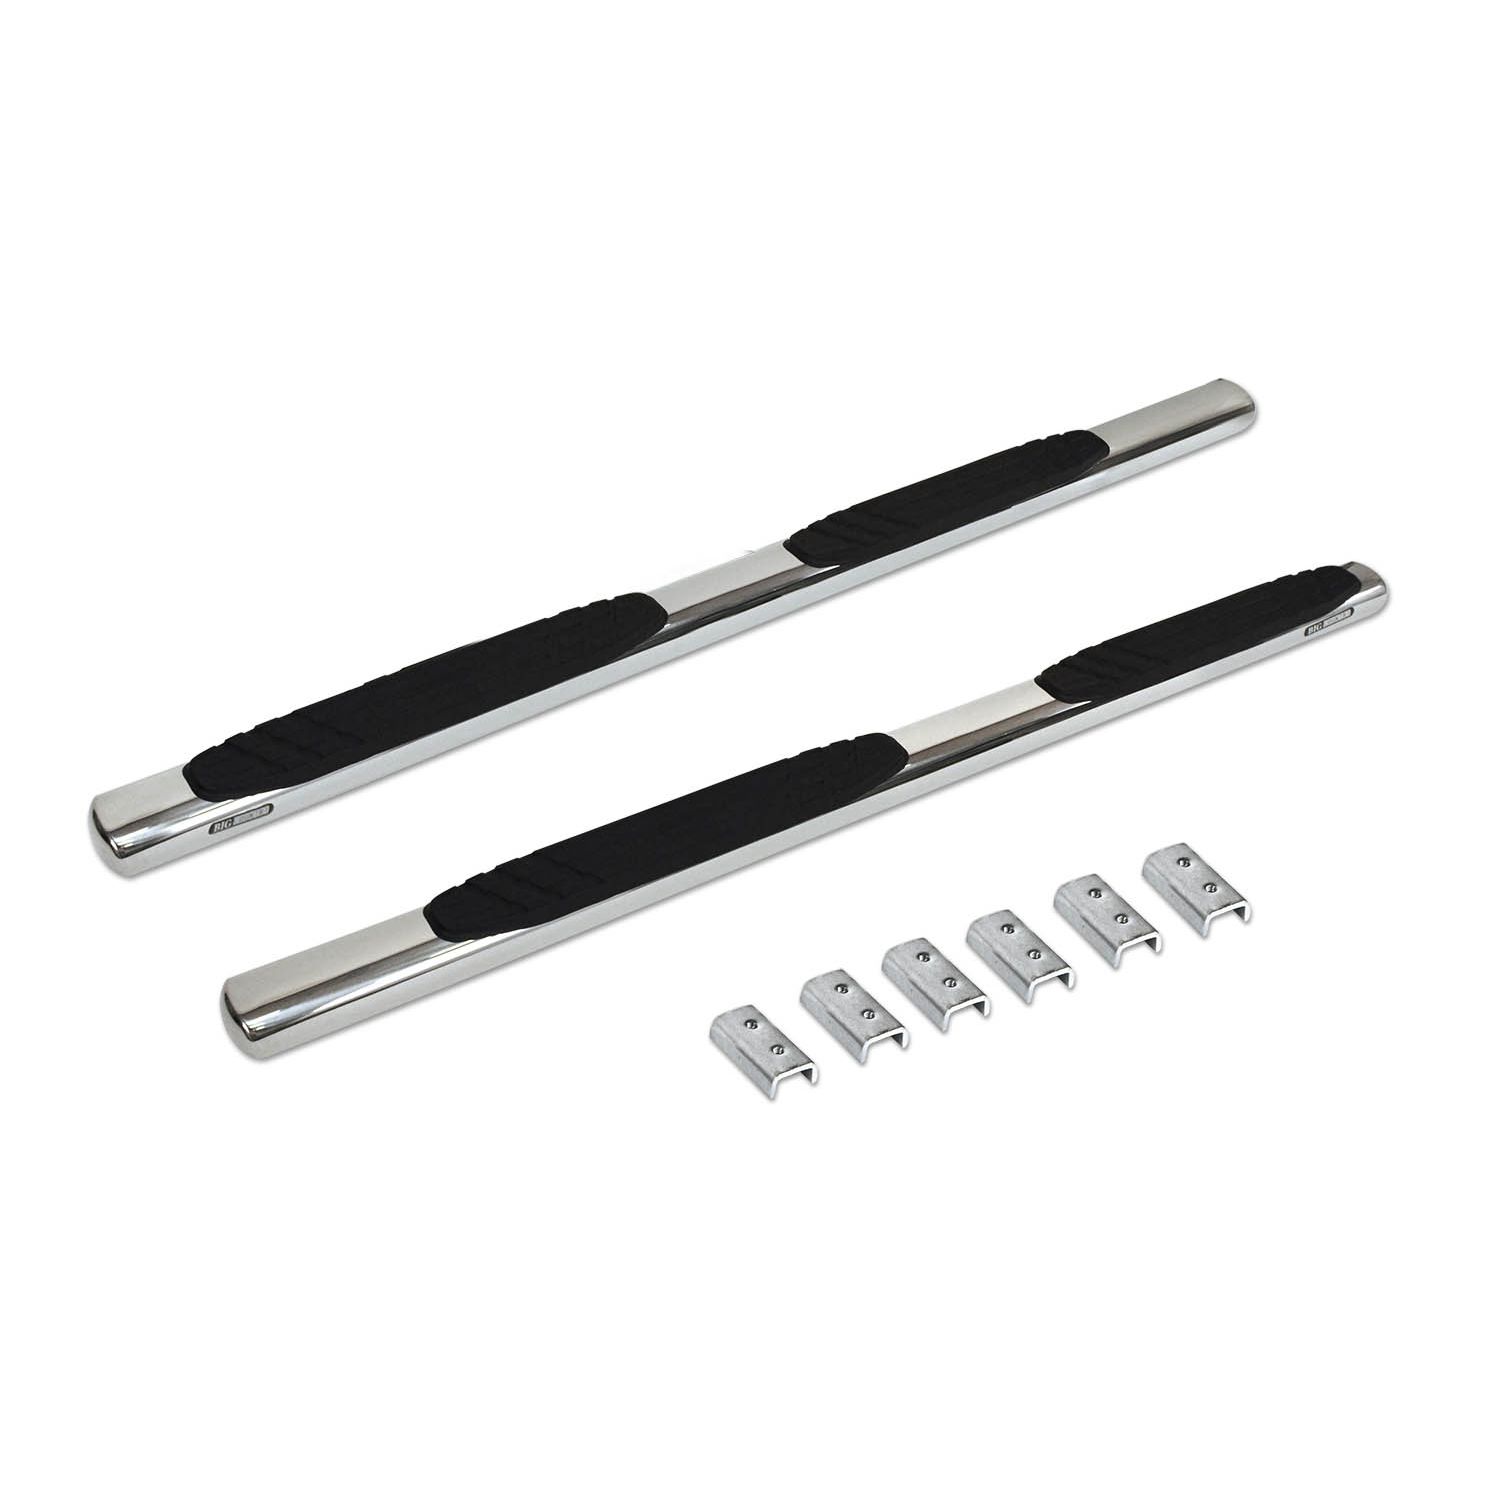 Go Rhino 640075PS - 4" OE Xtreme Series SideSteps - Boards Only - Polished Stainless Steel